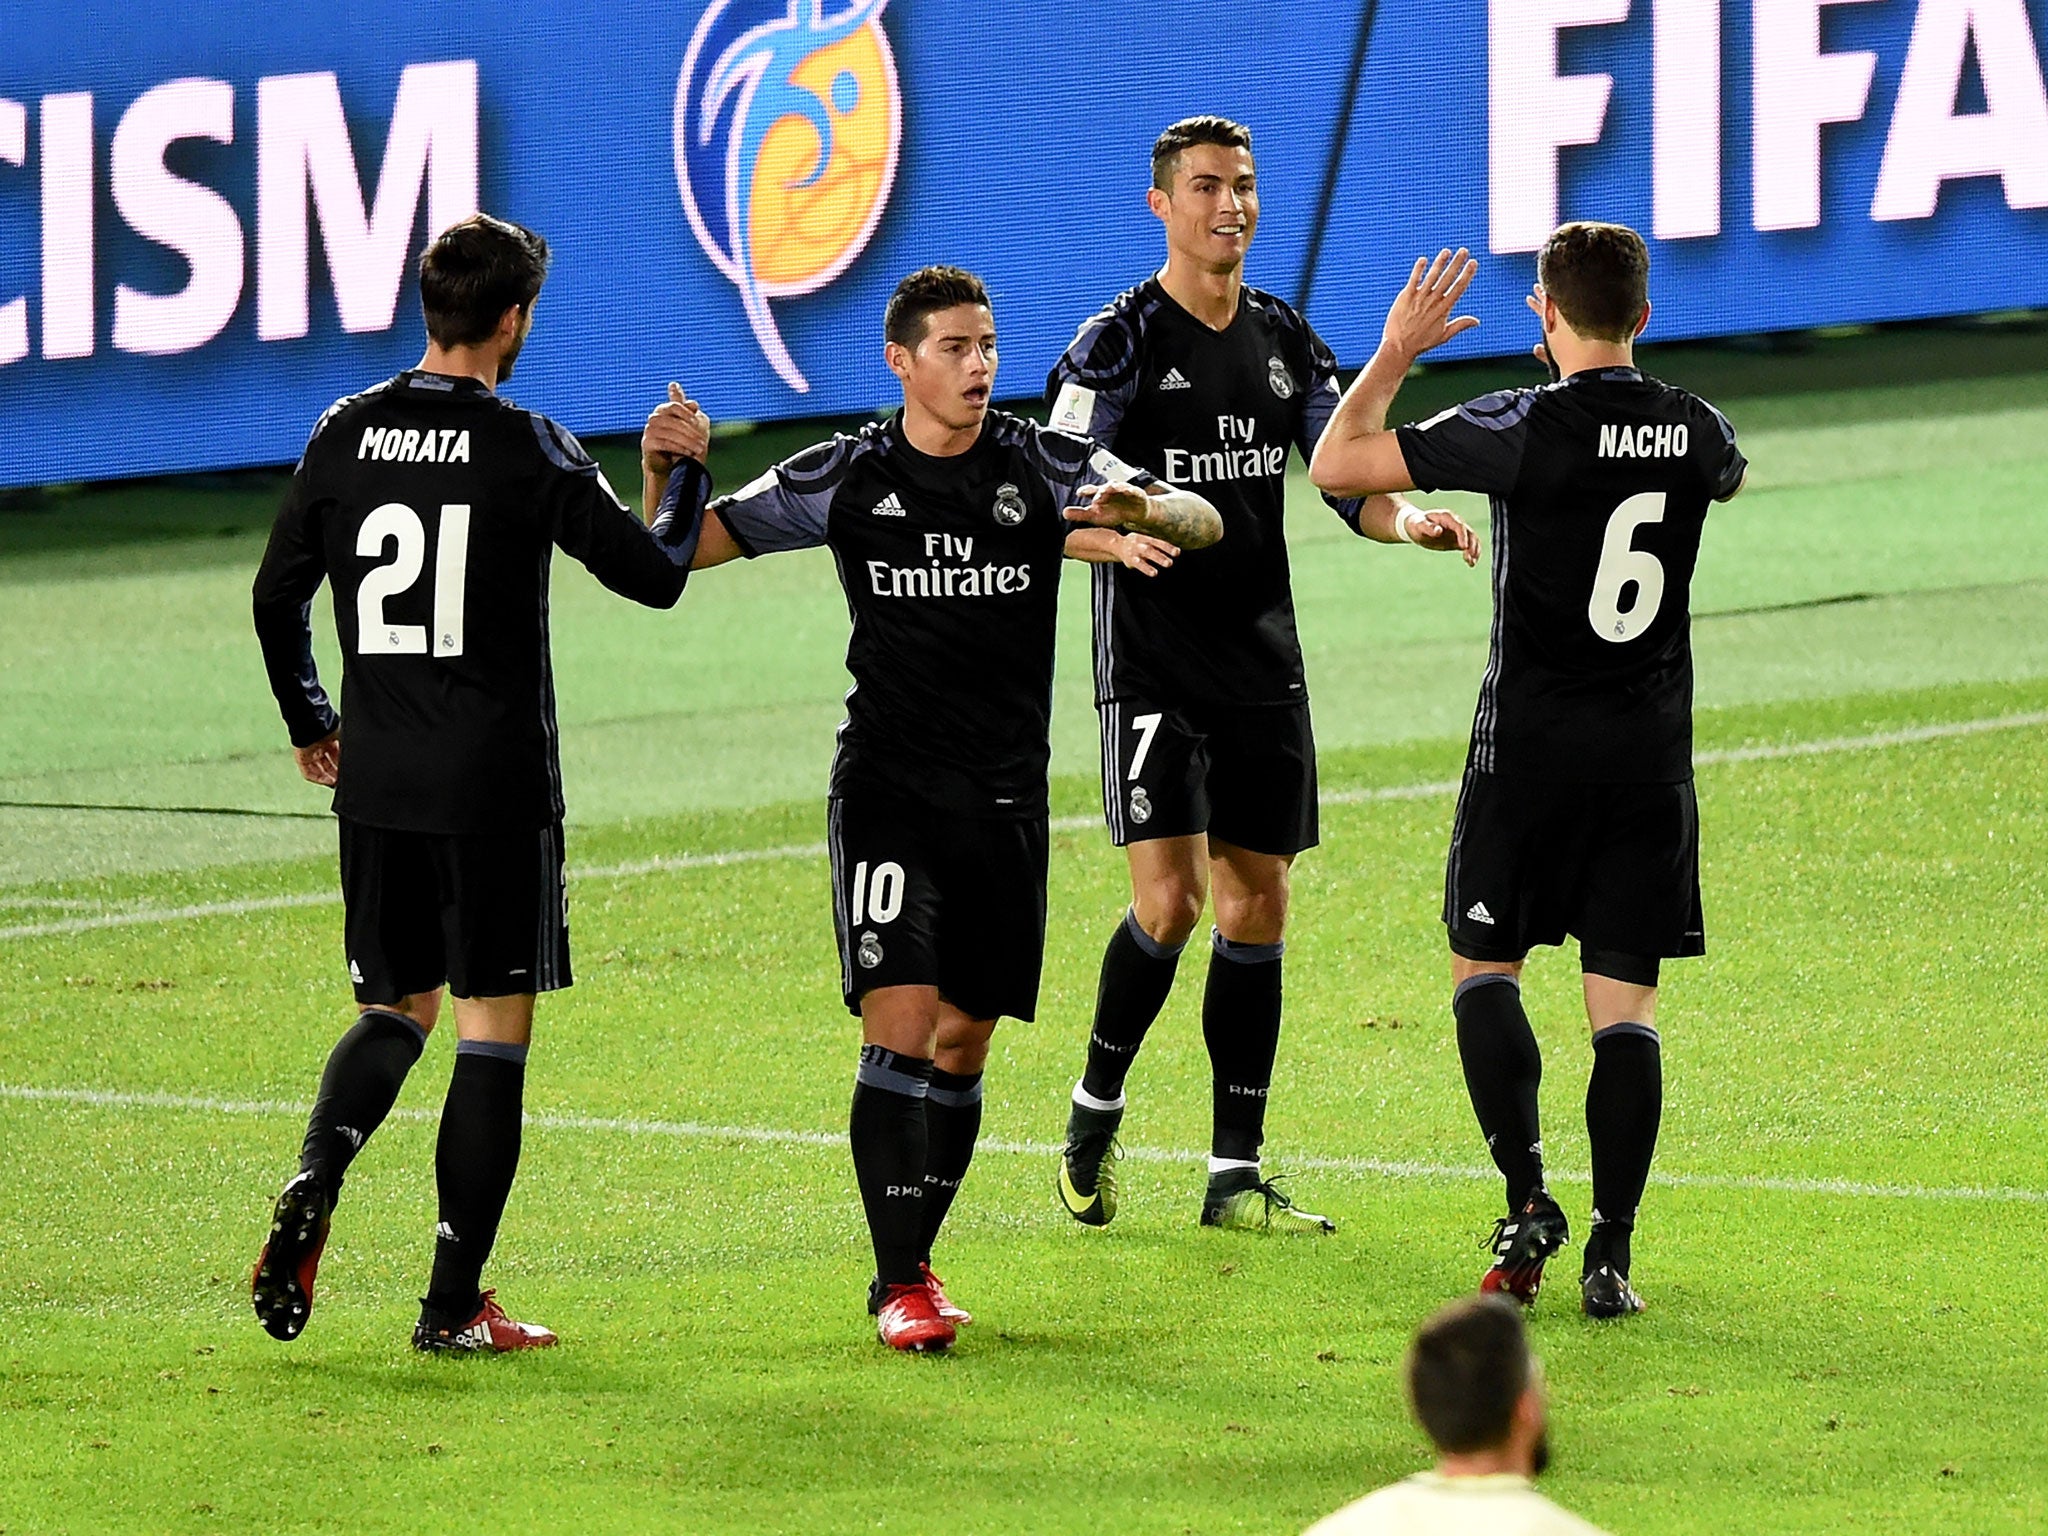 Madrid will be looking to extend their unbeaten run which stretches to 37 games